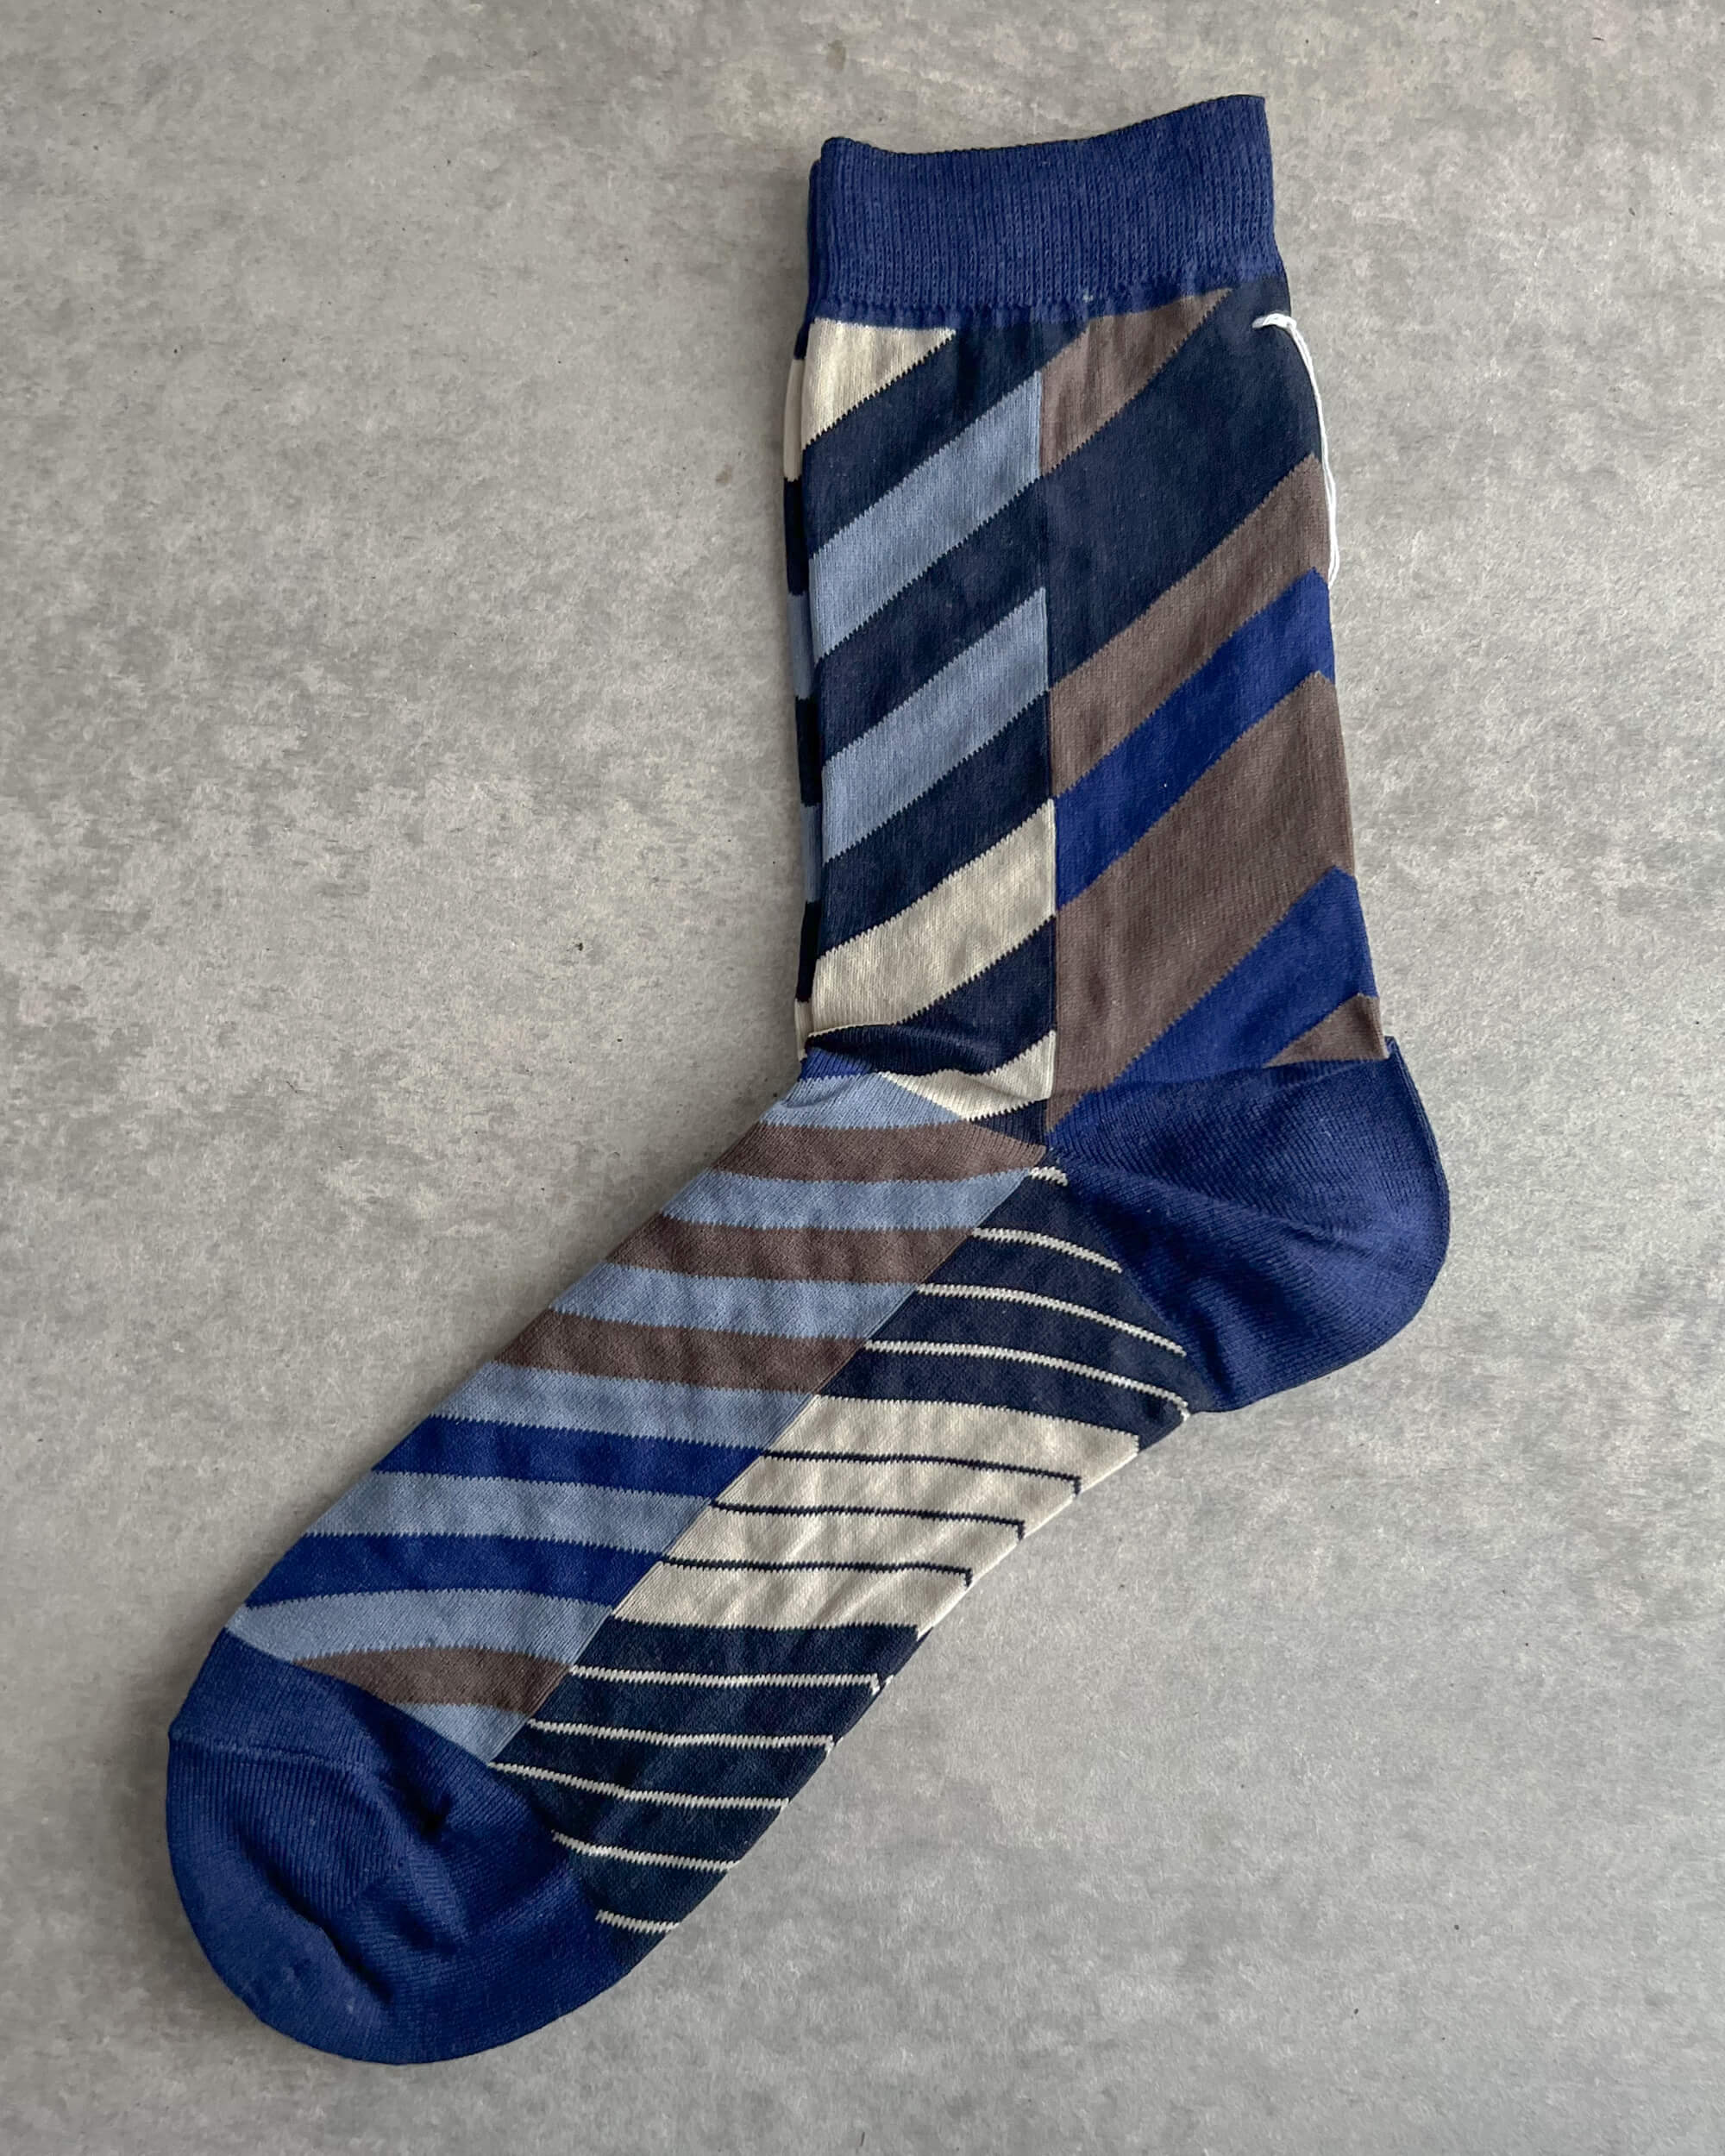 Nuno sock with traditional Japanese patterns